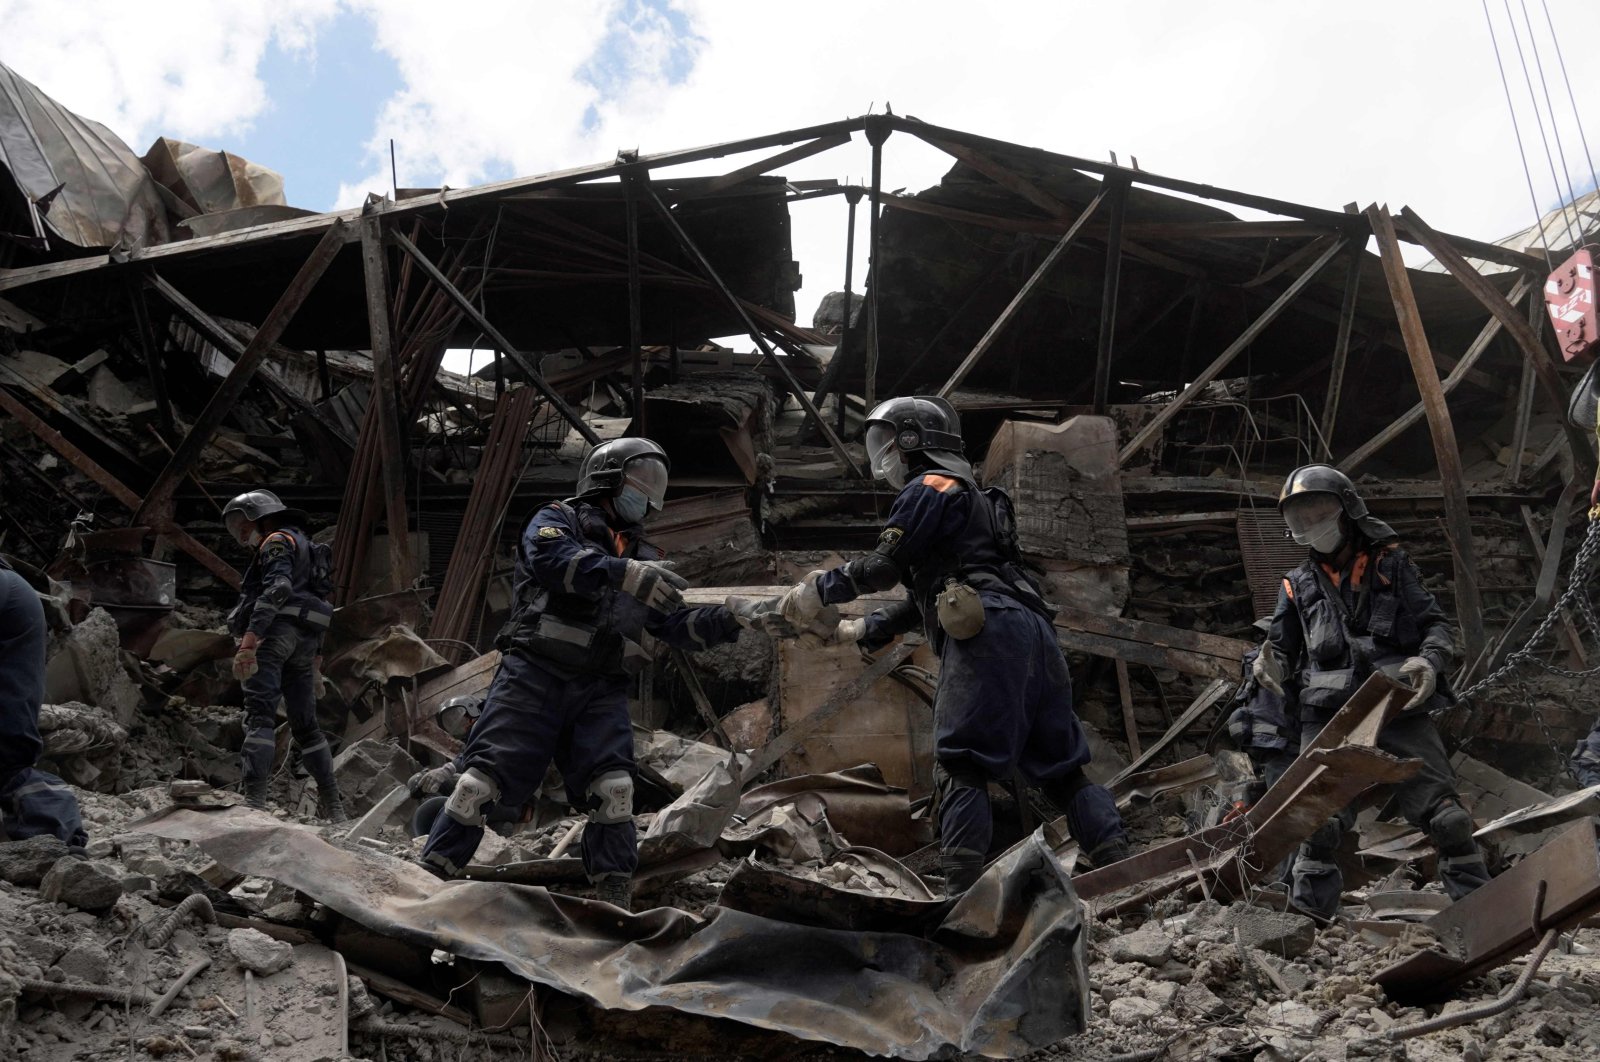 Emergency personnel clear debris in a partially destroyed drama theater in the city of Mariupol, Ukraine, May 10, 2022. (AFP Photo)